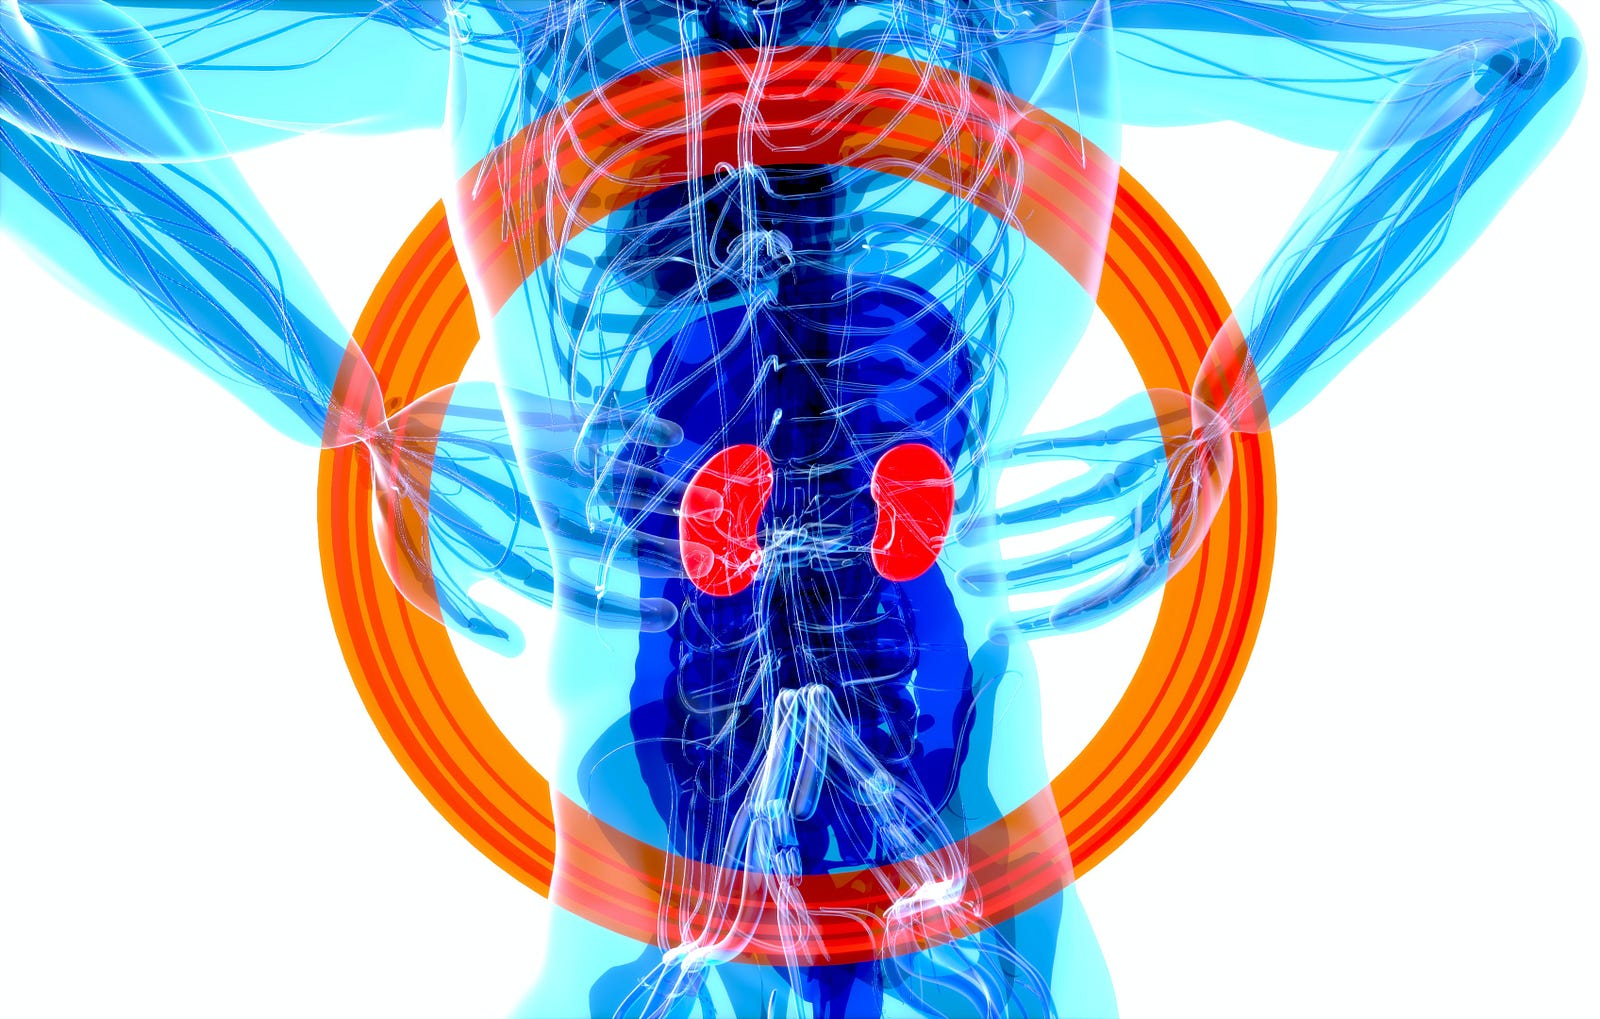 A color illustration of a translucent blue-colored person, hands on hips. We see her kidneys (in red), with a big outlining circle around the abdomen. The prevalence of chronic kidney disease (CKD) is also increasing globally, with the condition projected to become the fifth most prevalent chronic one by 2040.